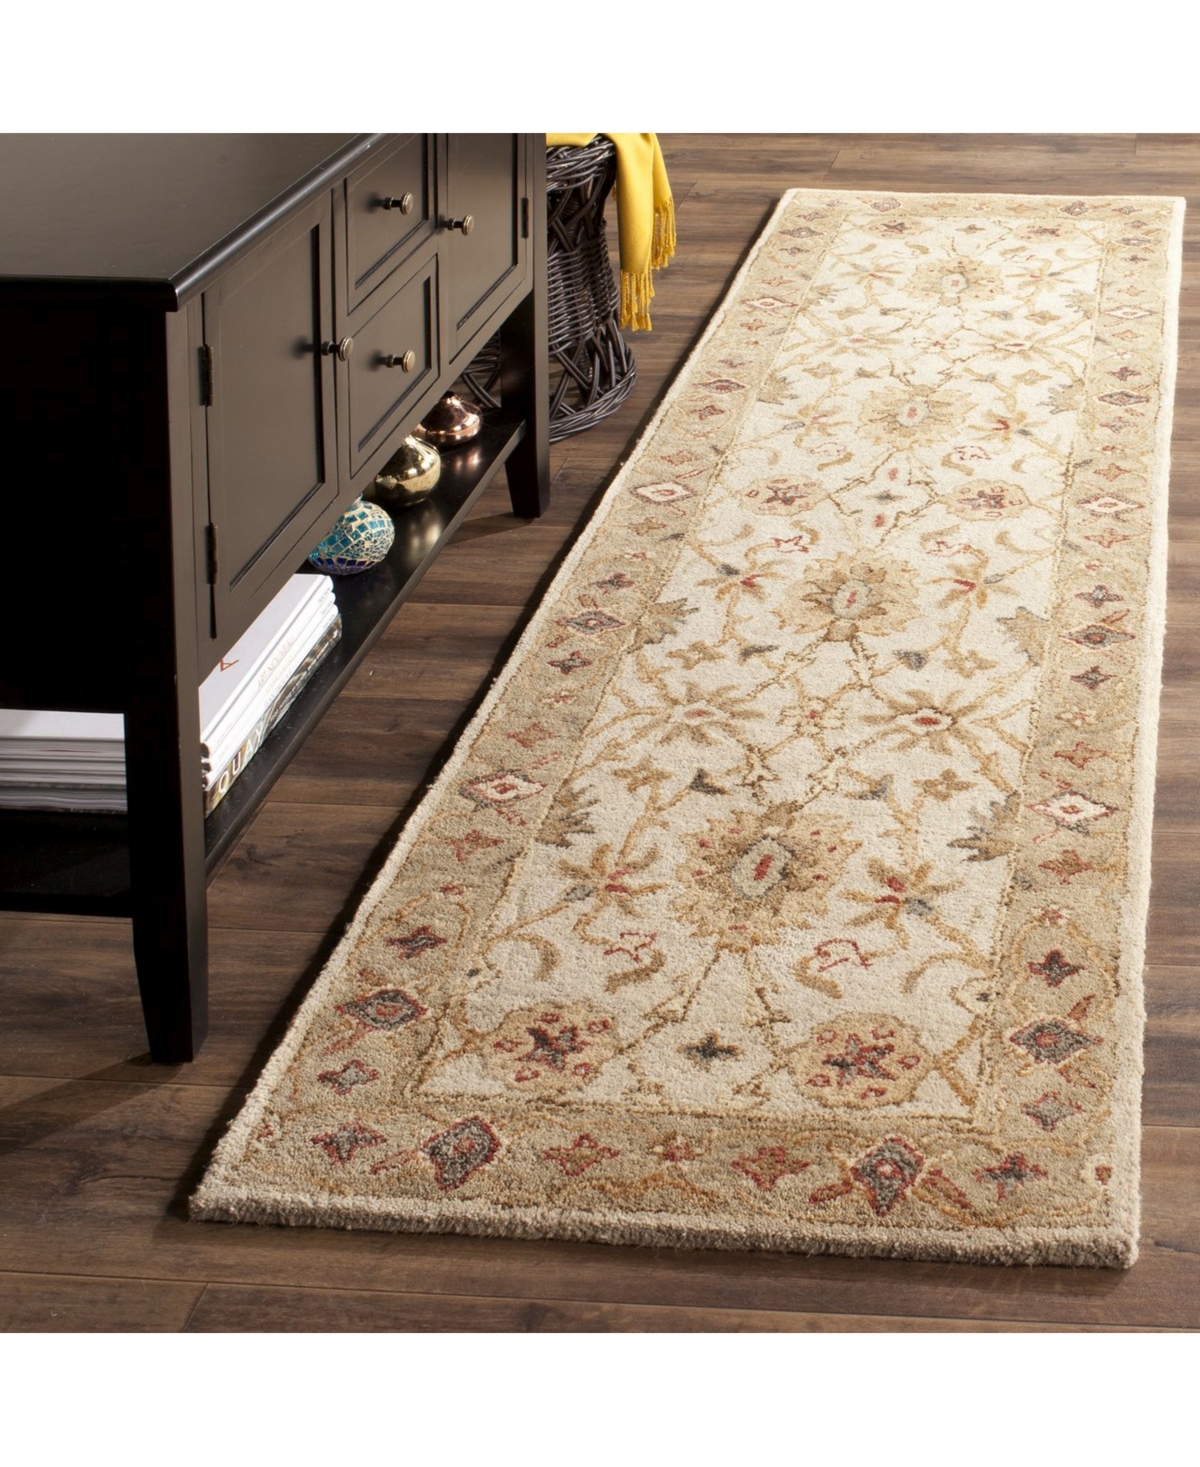 Safavieh Antiquity At816 Gray And Beige 2'3" X 12' Runner Area Rug